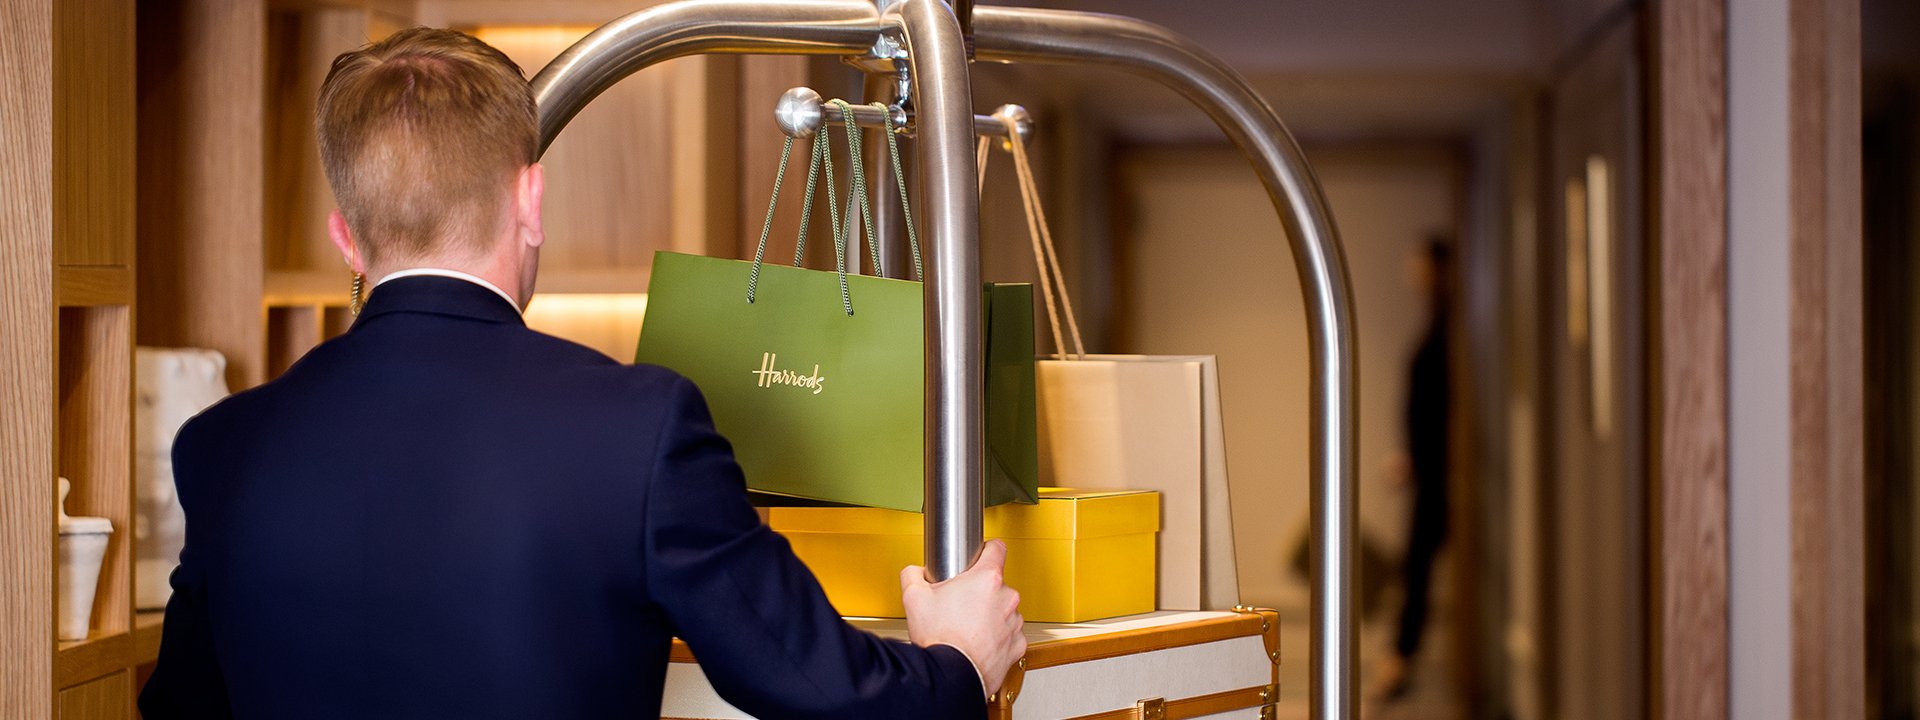 A staff concierge takes a hotel guest's luggage at The Berkeley to their room.